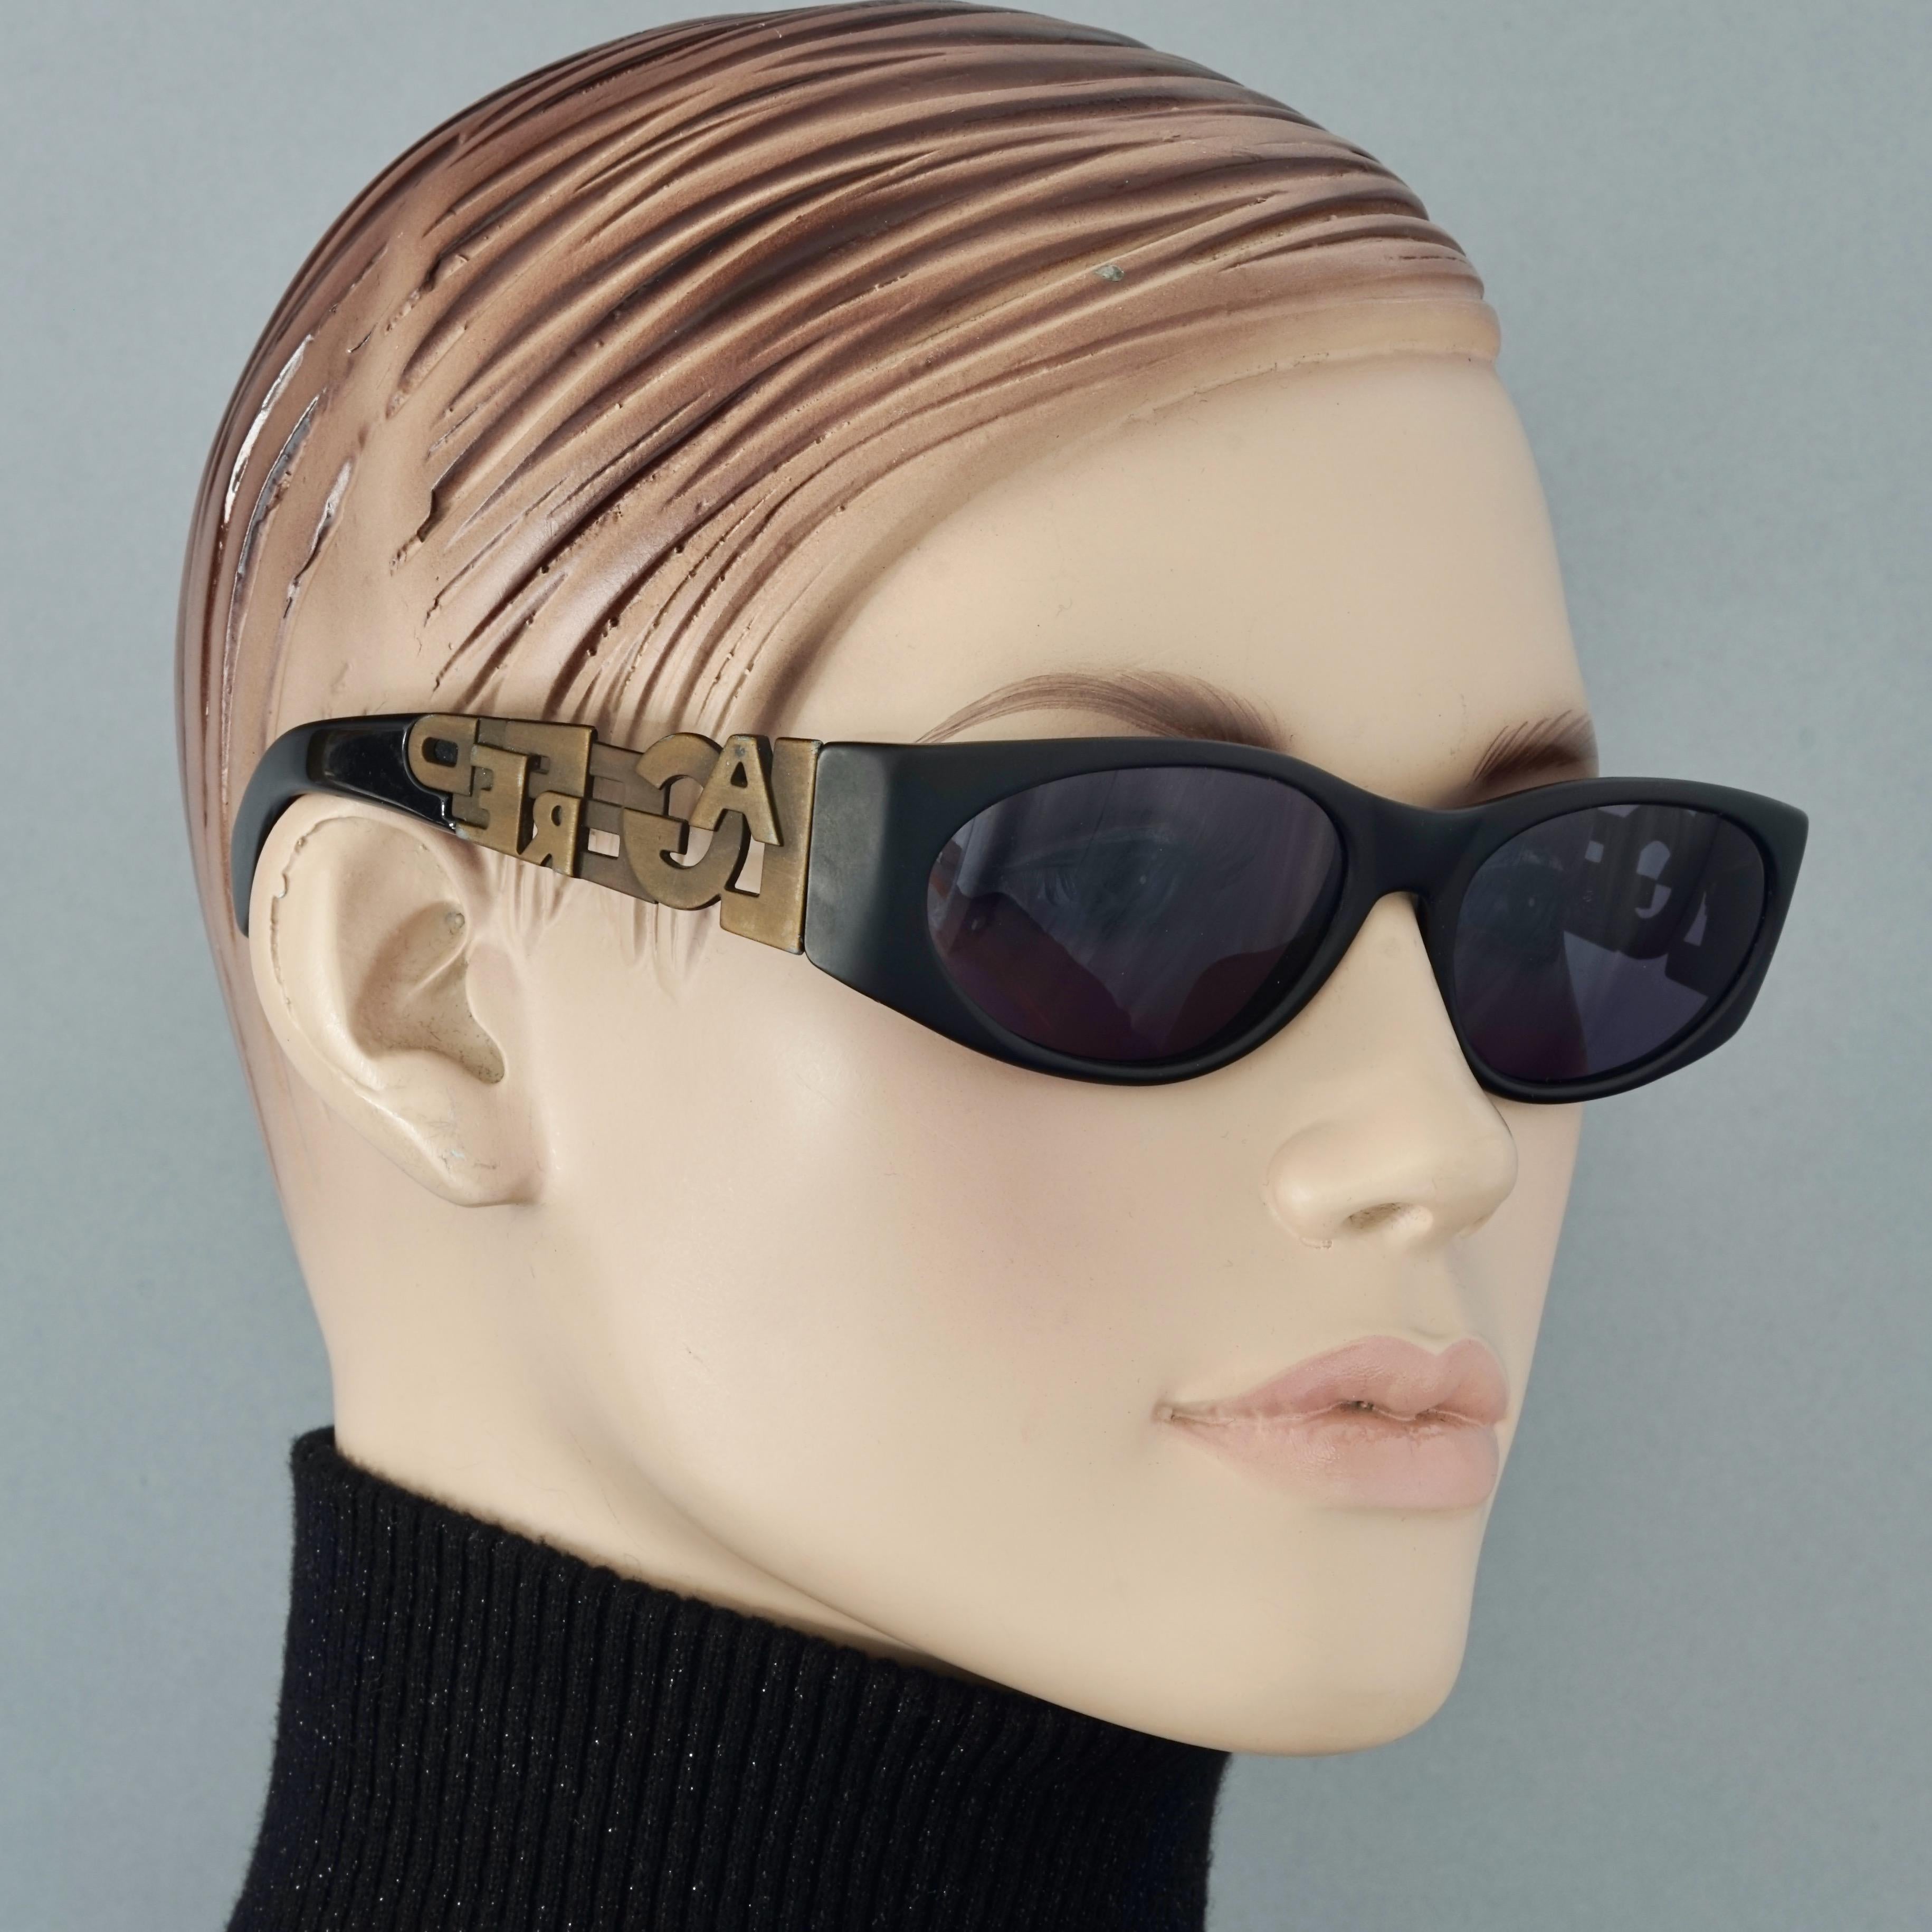 Vintage KARL LAGERFELD Bronze Spelled Logo Sunglasses

Measurements:
Frame Height: 1.57 inches (4 cm)
Frame Width: 5.70 inches (14.5 cm)
Temples: 4.52 inches (11.5 cm)

Features:
- 100% Authentic KARL LAGERFELD. 
- Black sunglasses with bronze tone